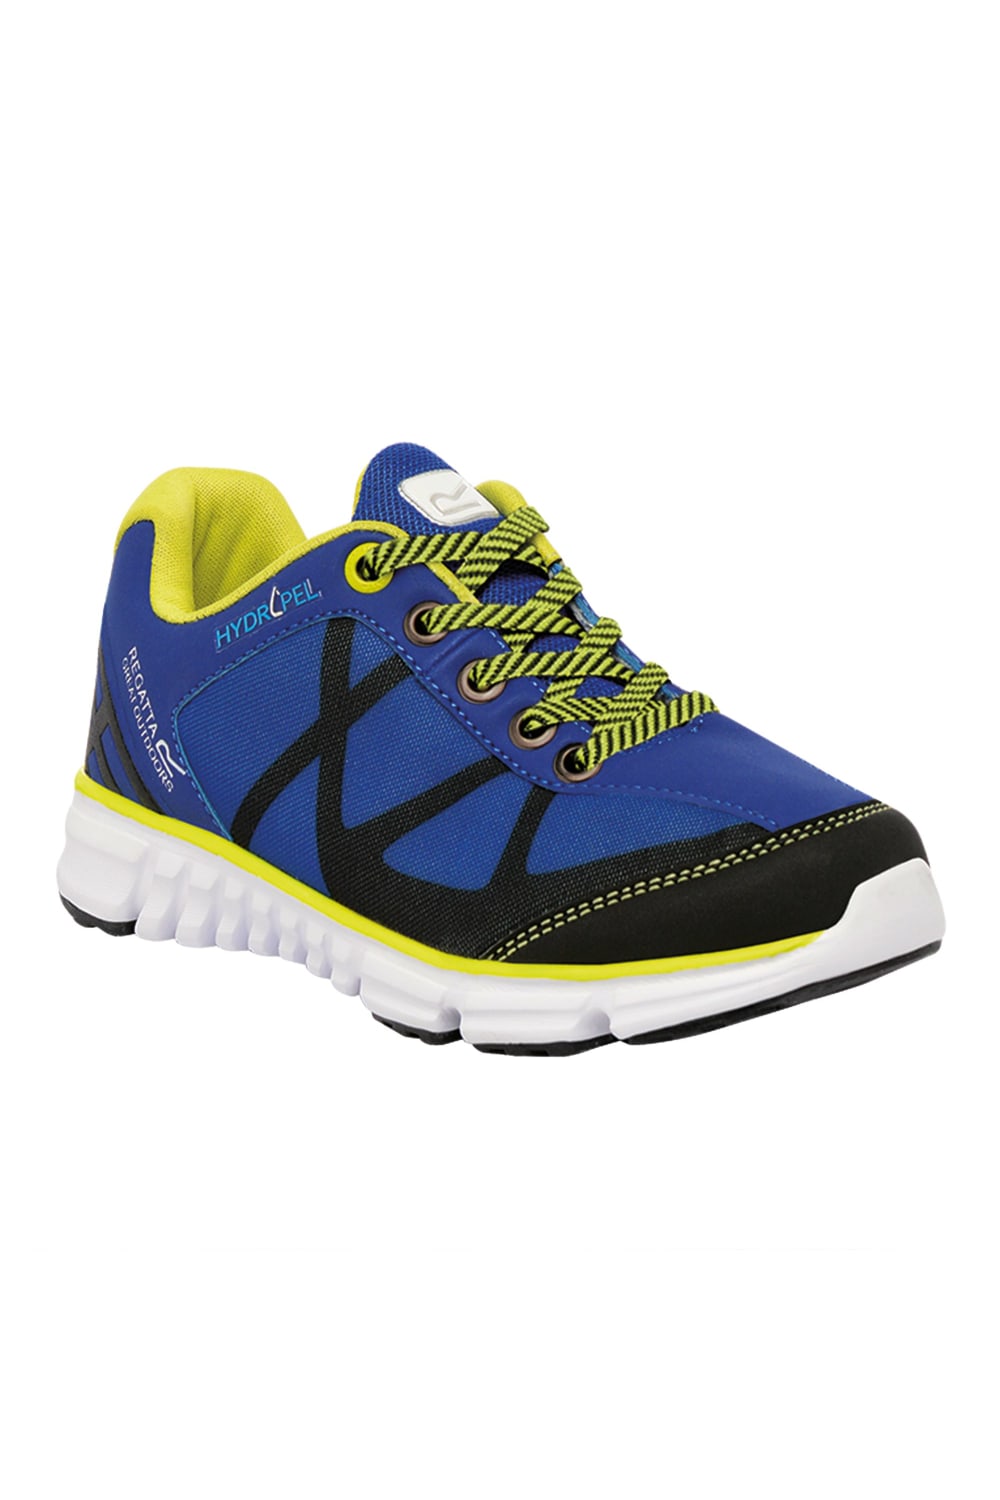 Regatta Great Outdoors Childrens/Kids Hypertrail Trainers/Sneakers